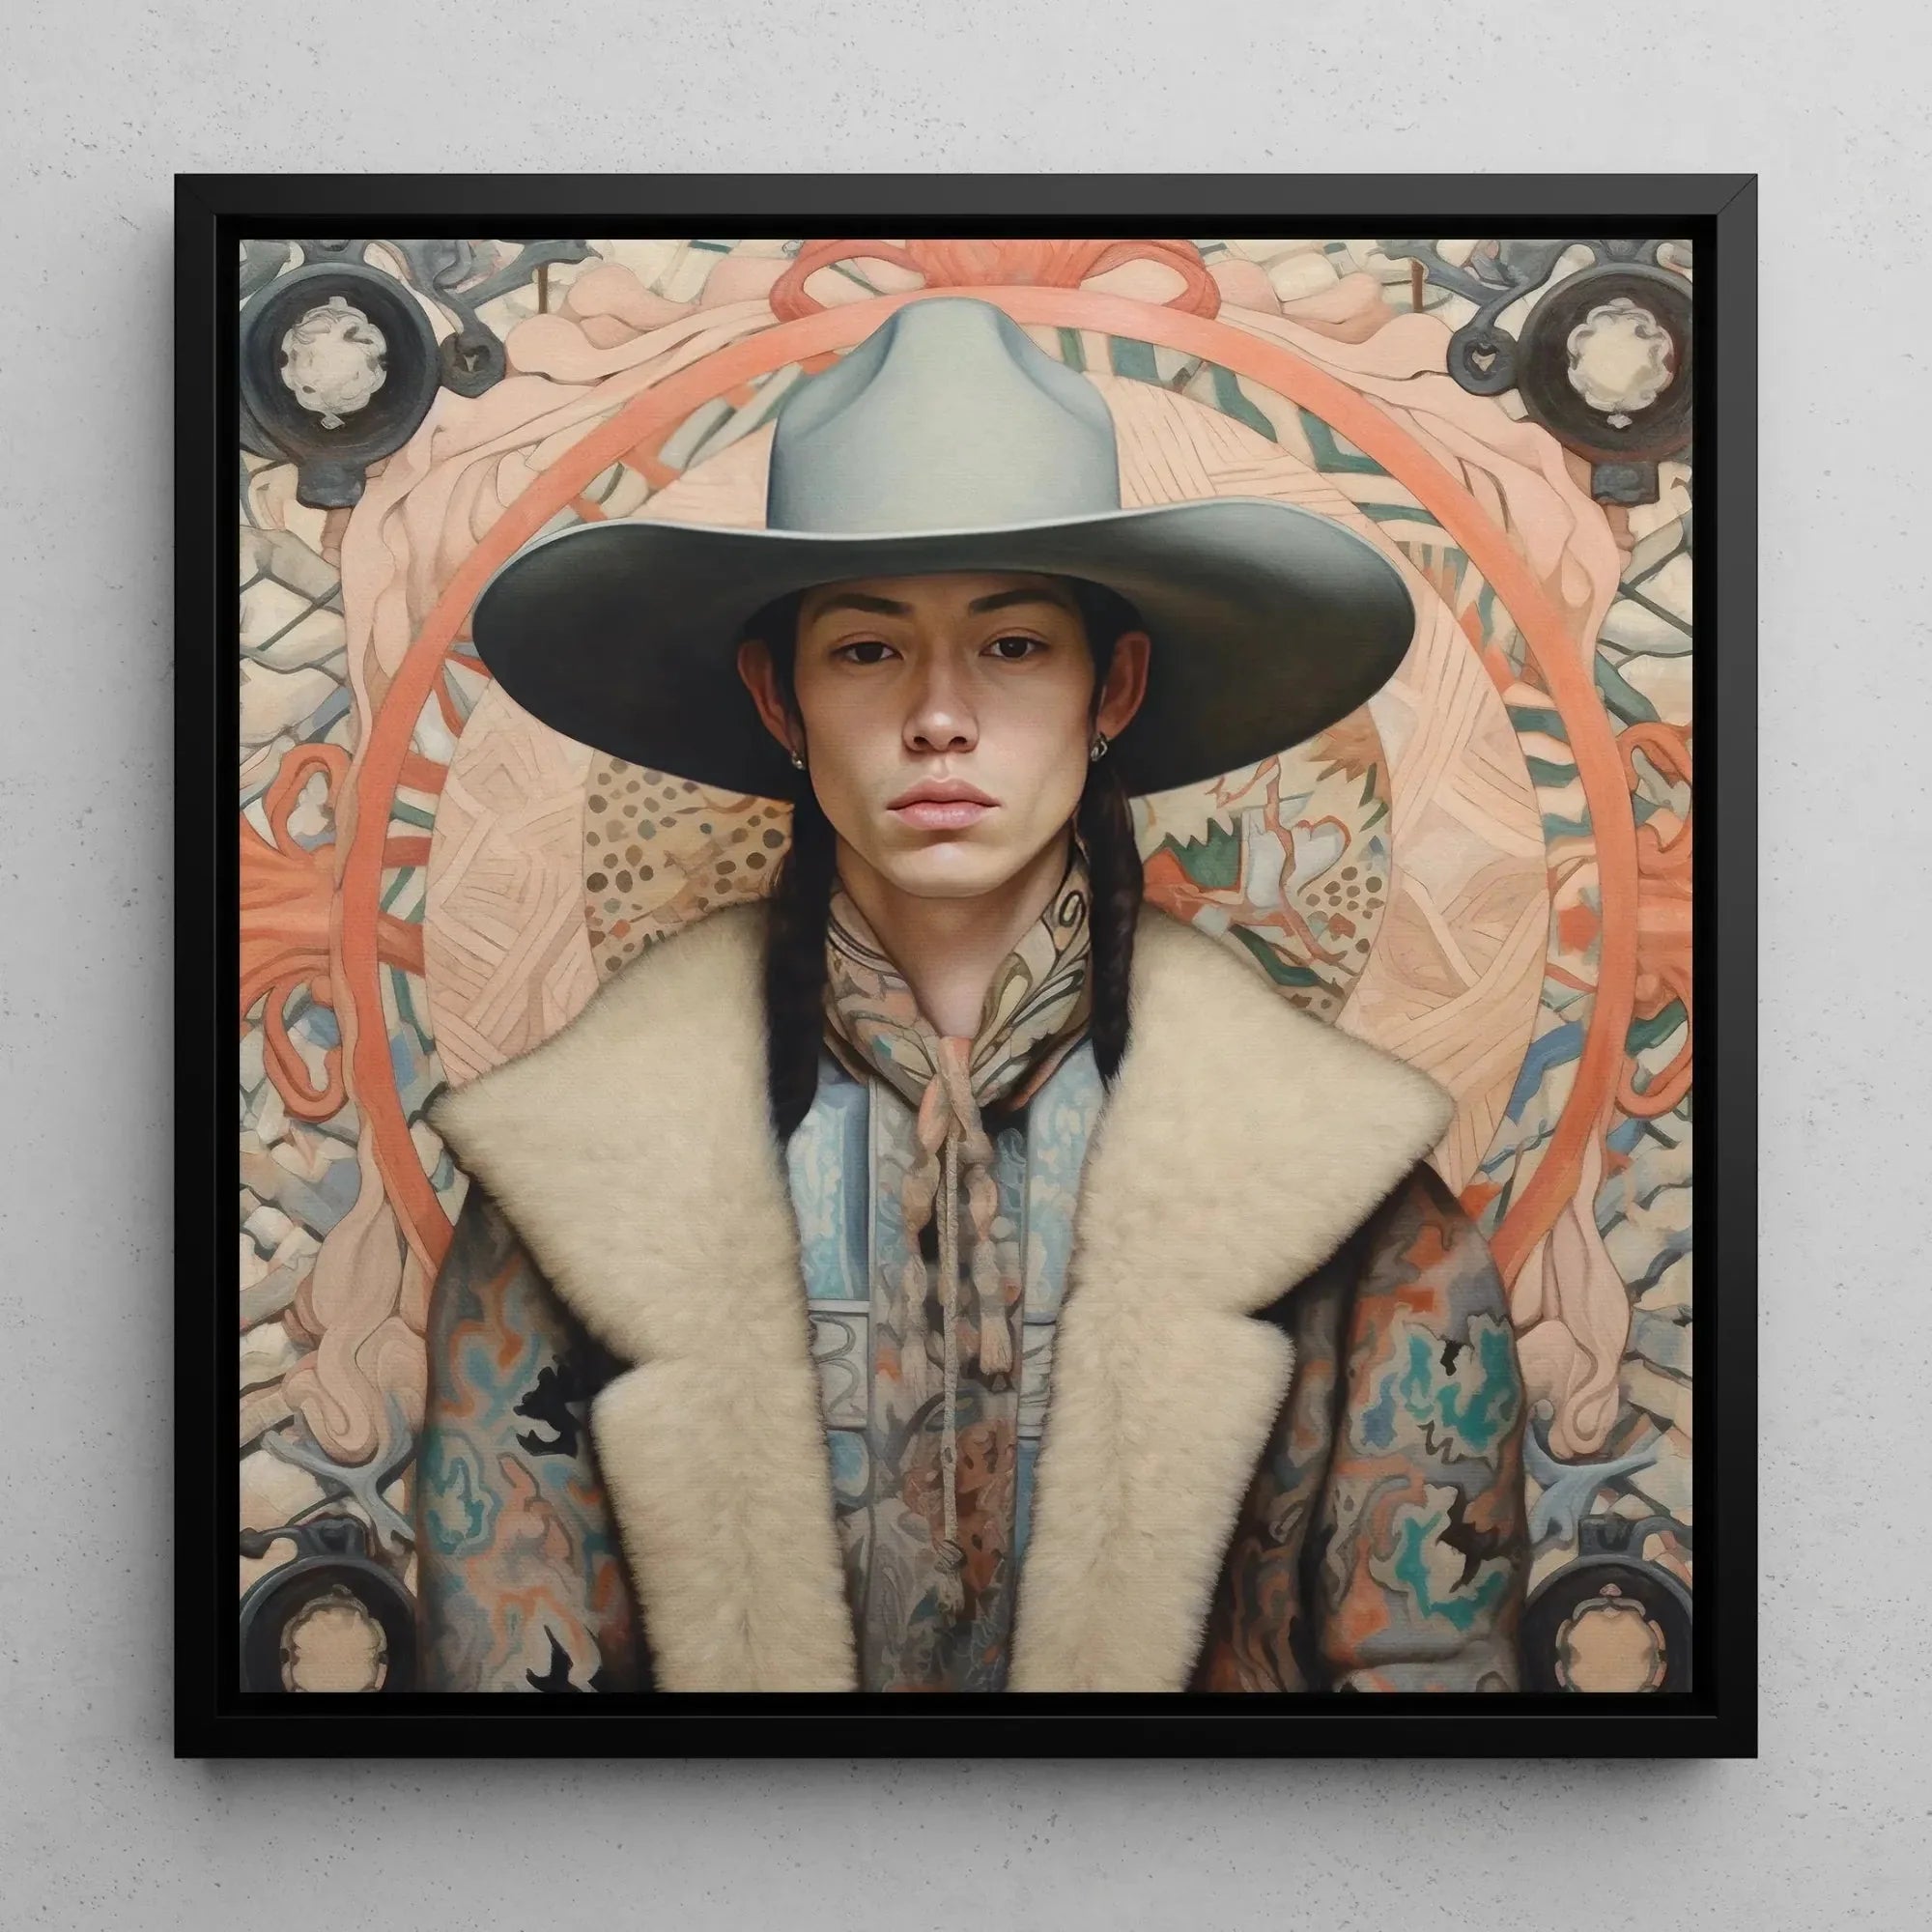 Jacy - Gay Cowboy Framed Canvas - Native American Queerart - 16’x16’ - Posters Prints & Visual Artwork - Aesthetic Art